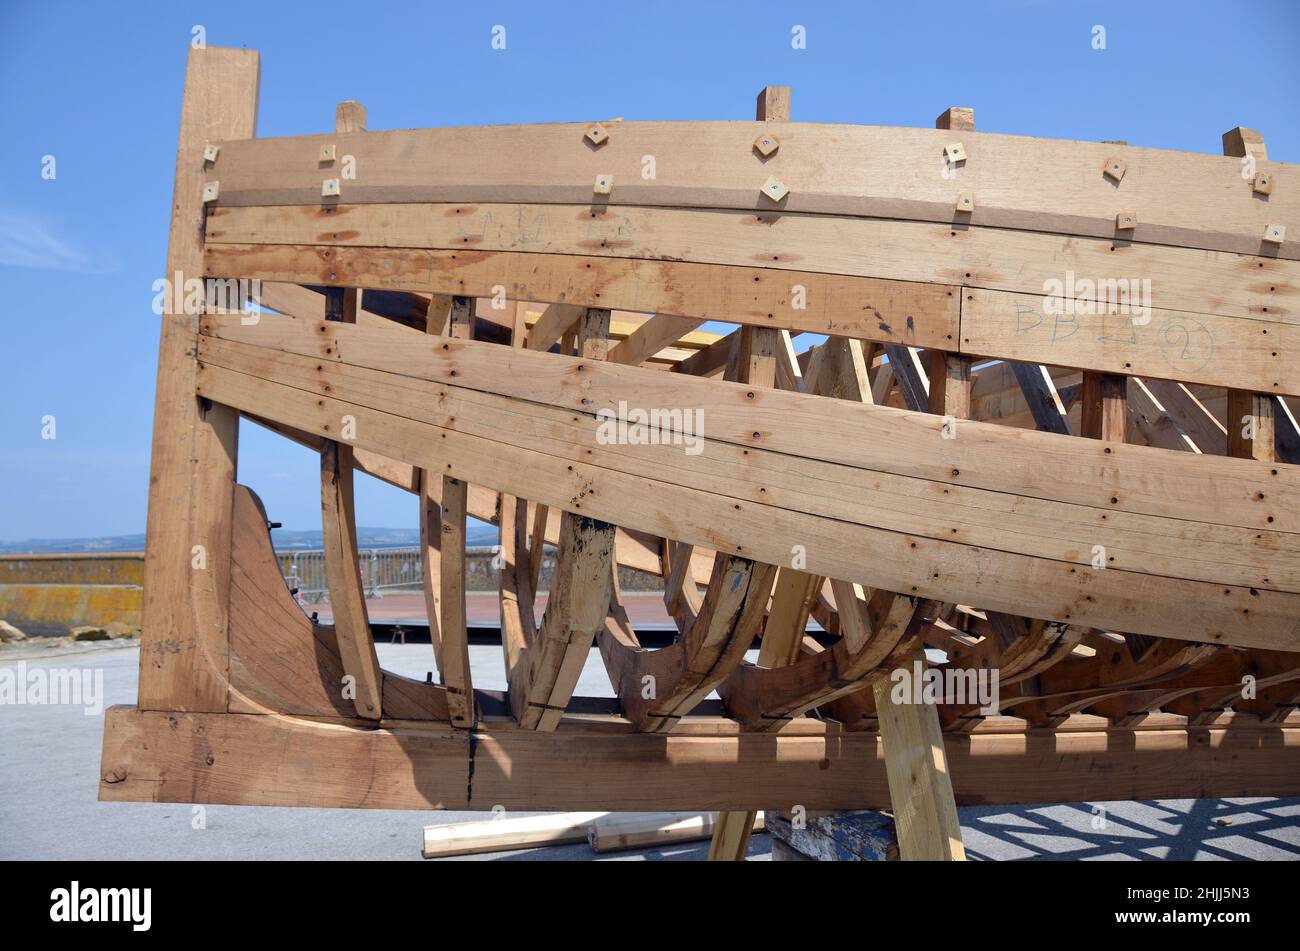 A classical wooden fishing boat in the final stage of construction